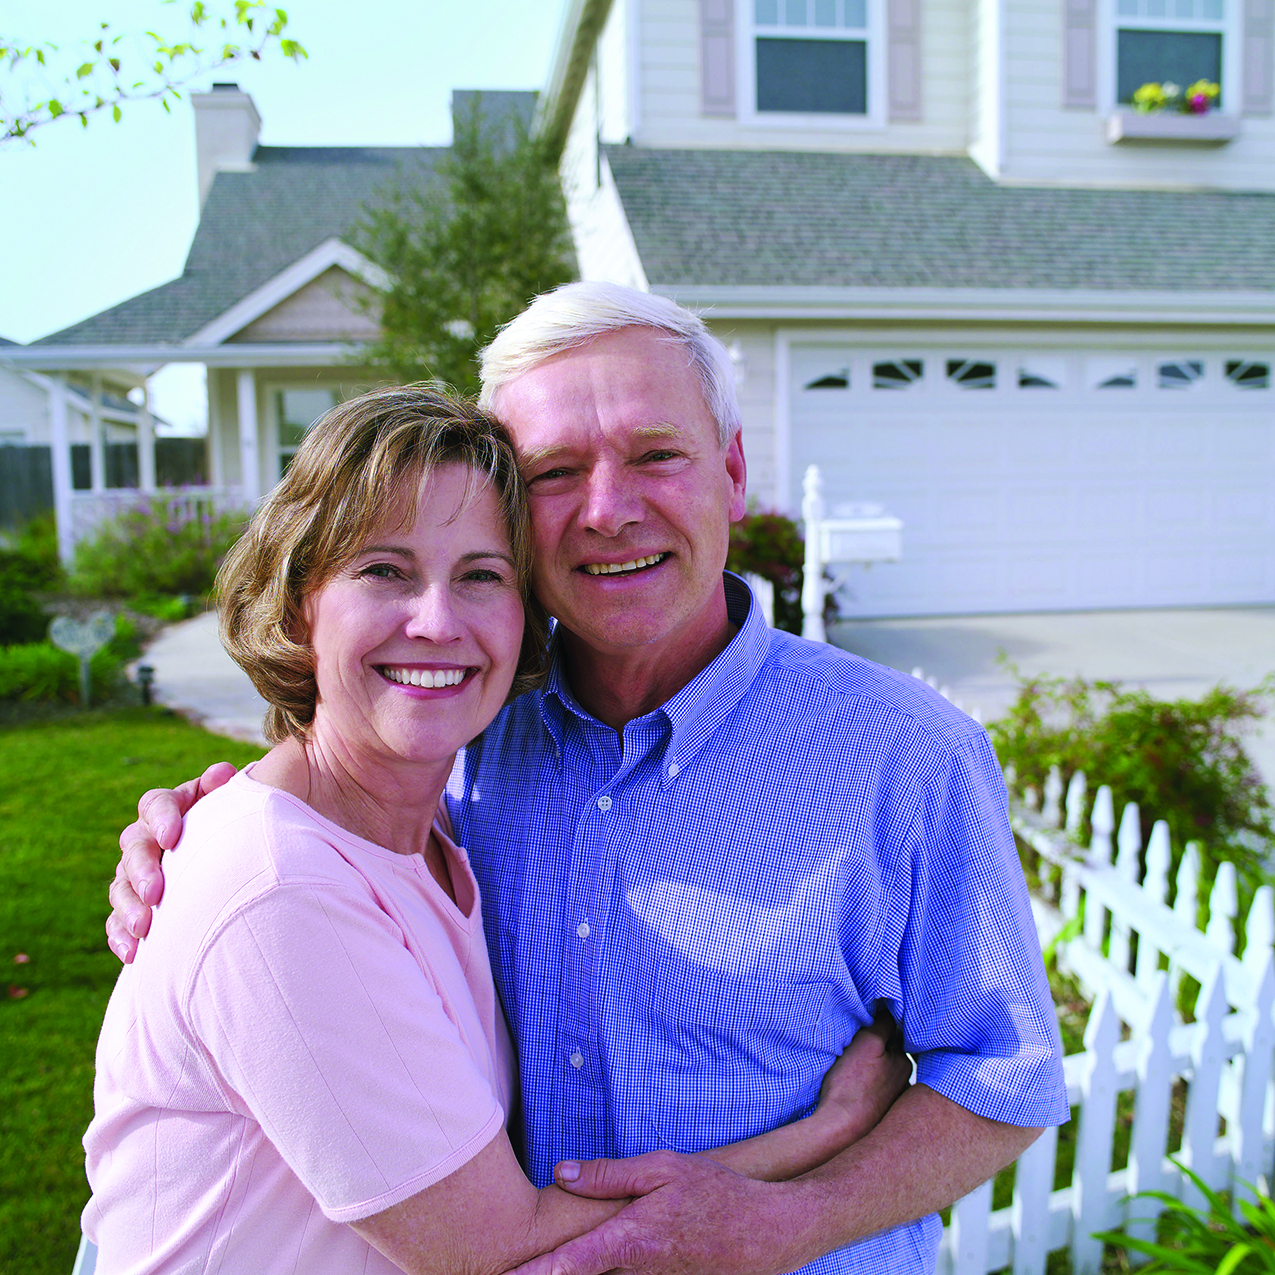 Reverse Mortgages Explained